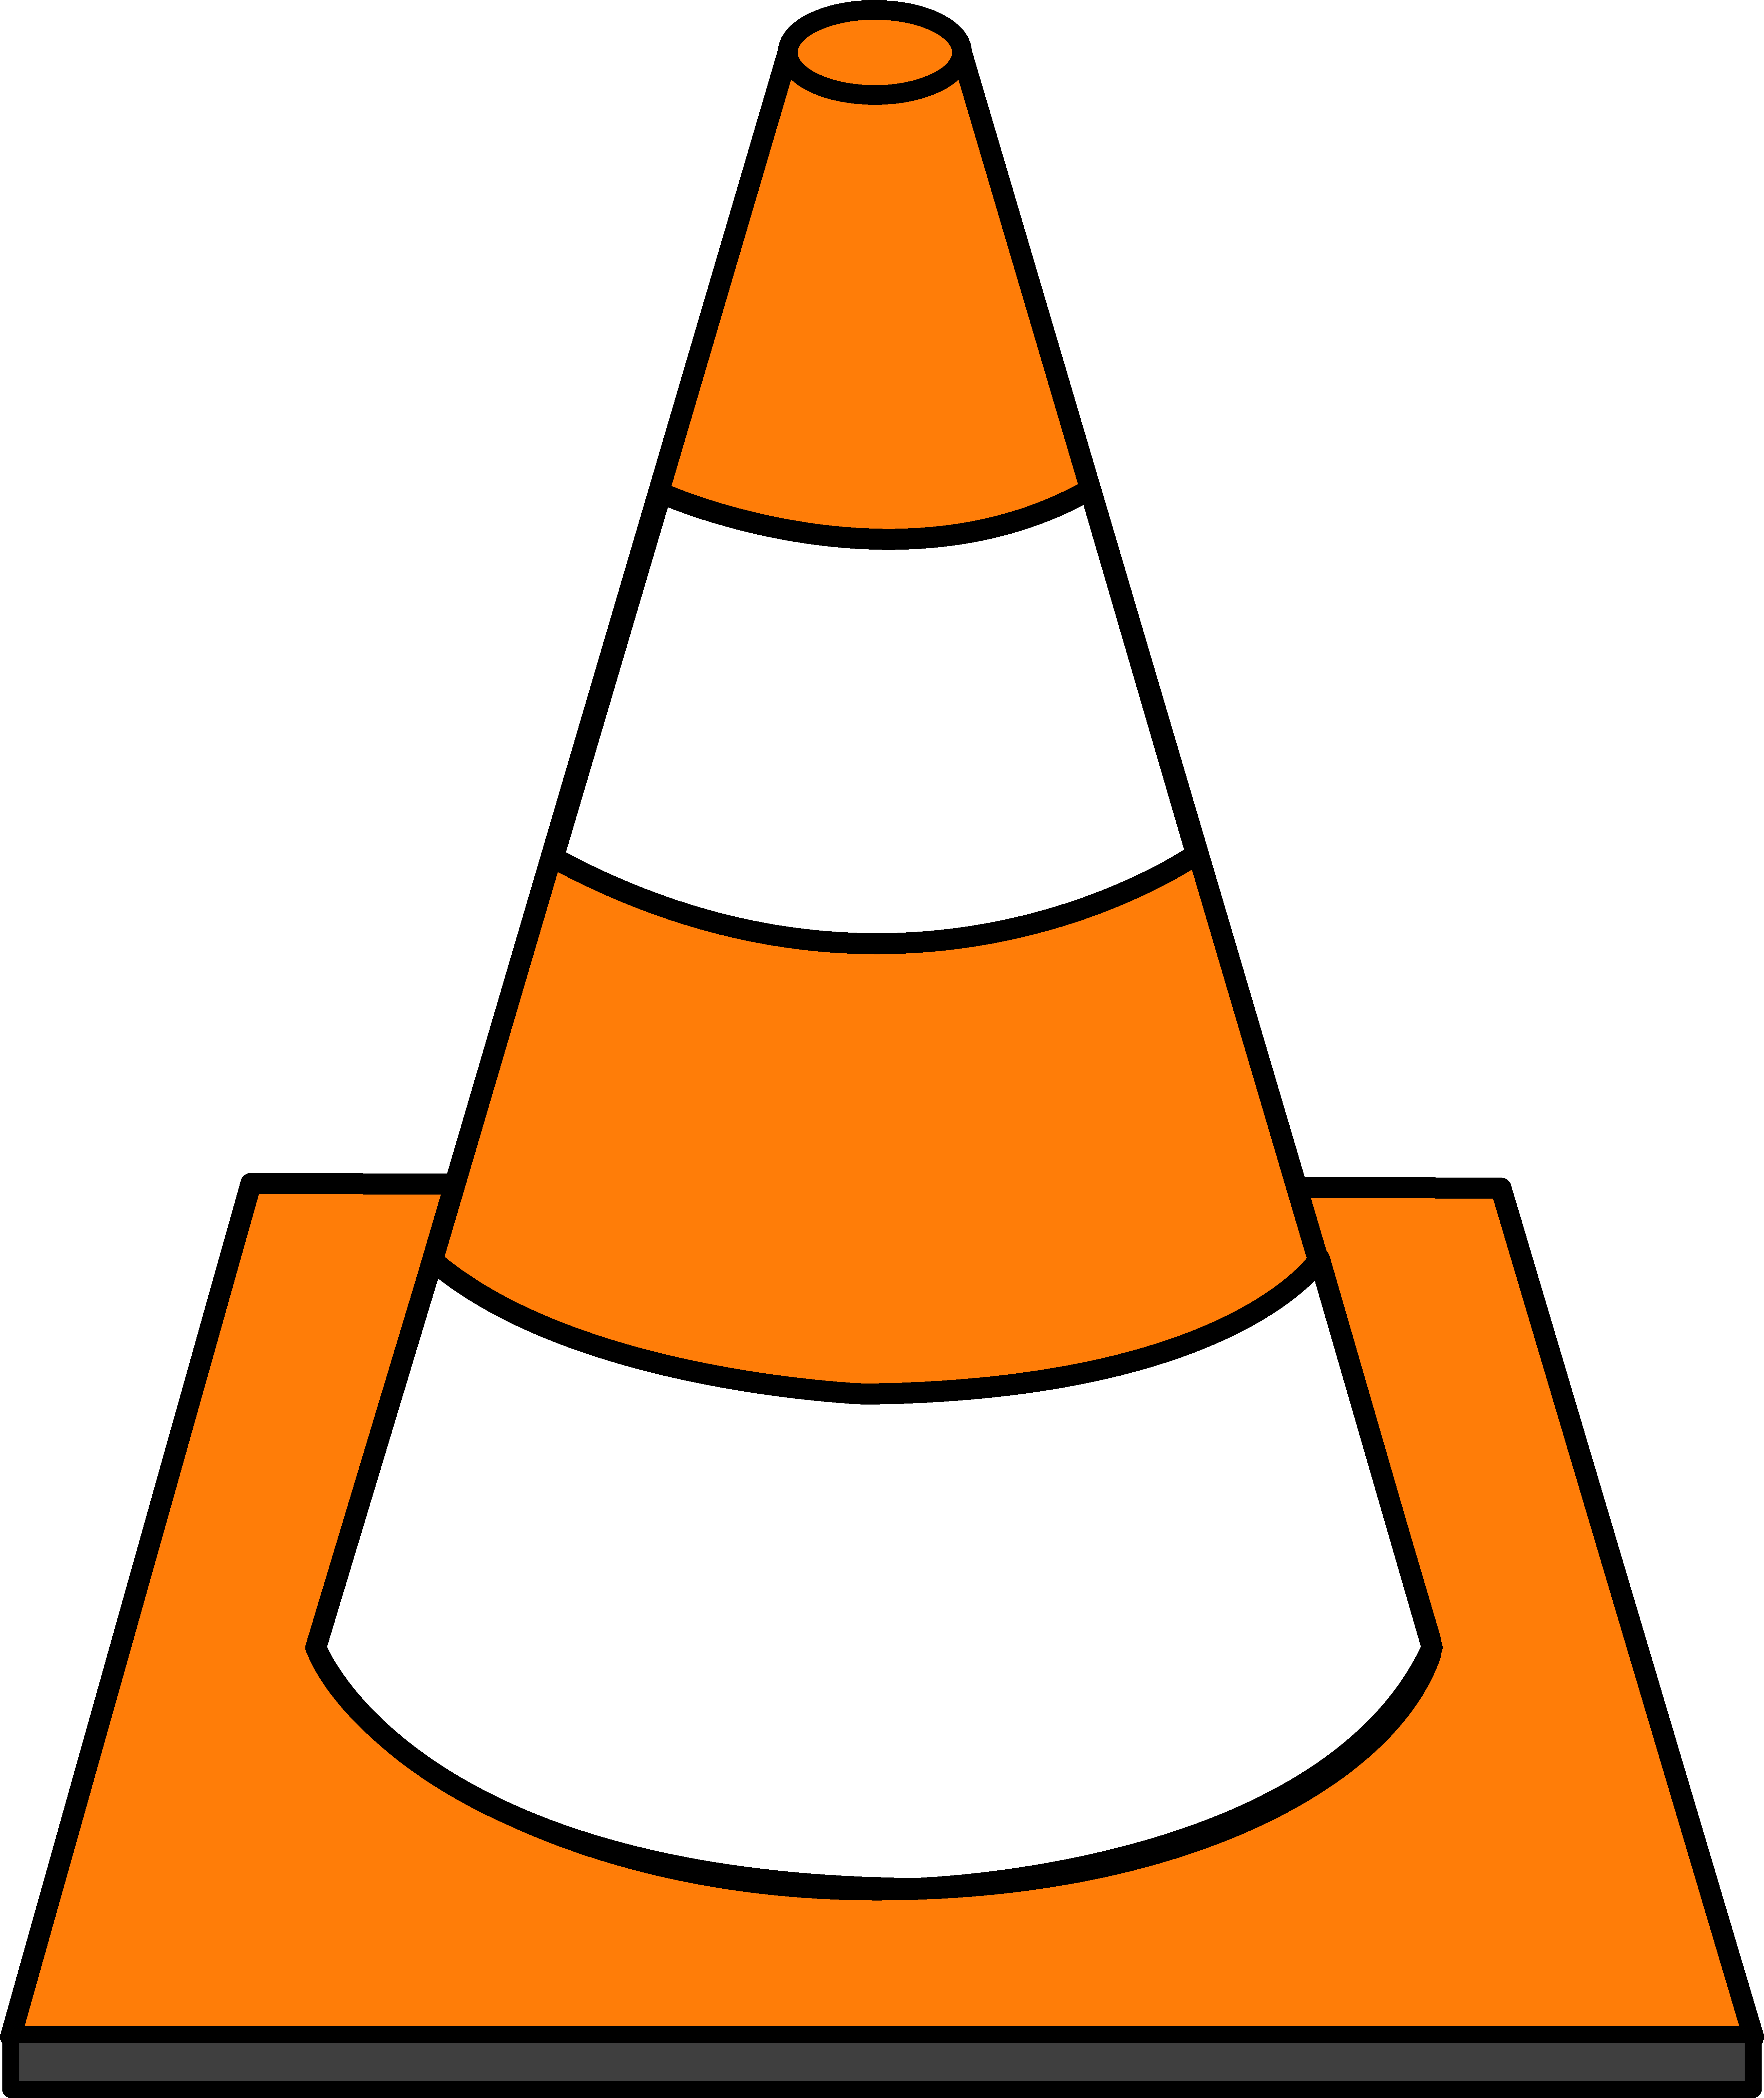 Construction cone panda free. Highway clipart side view